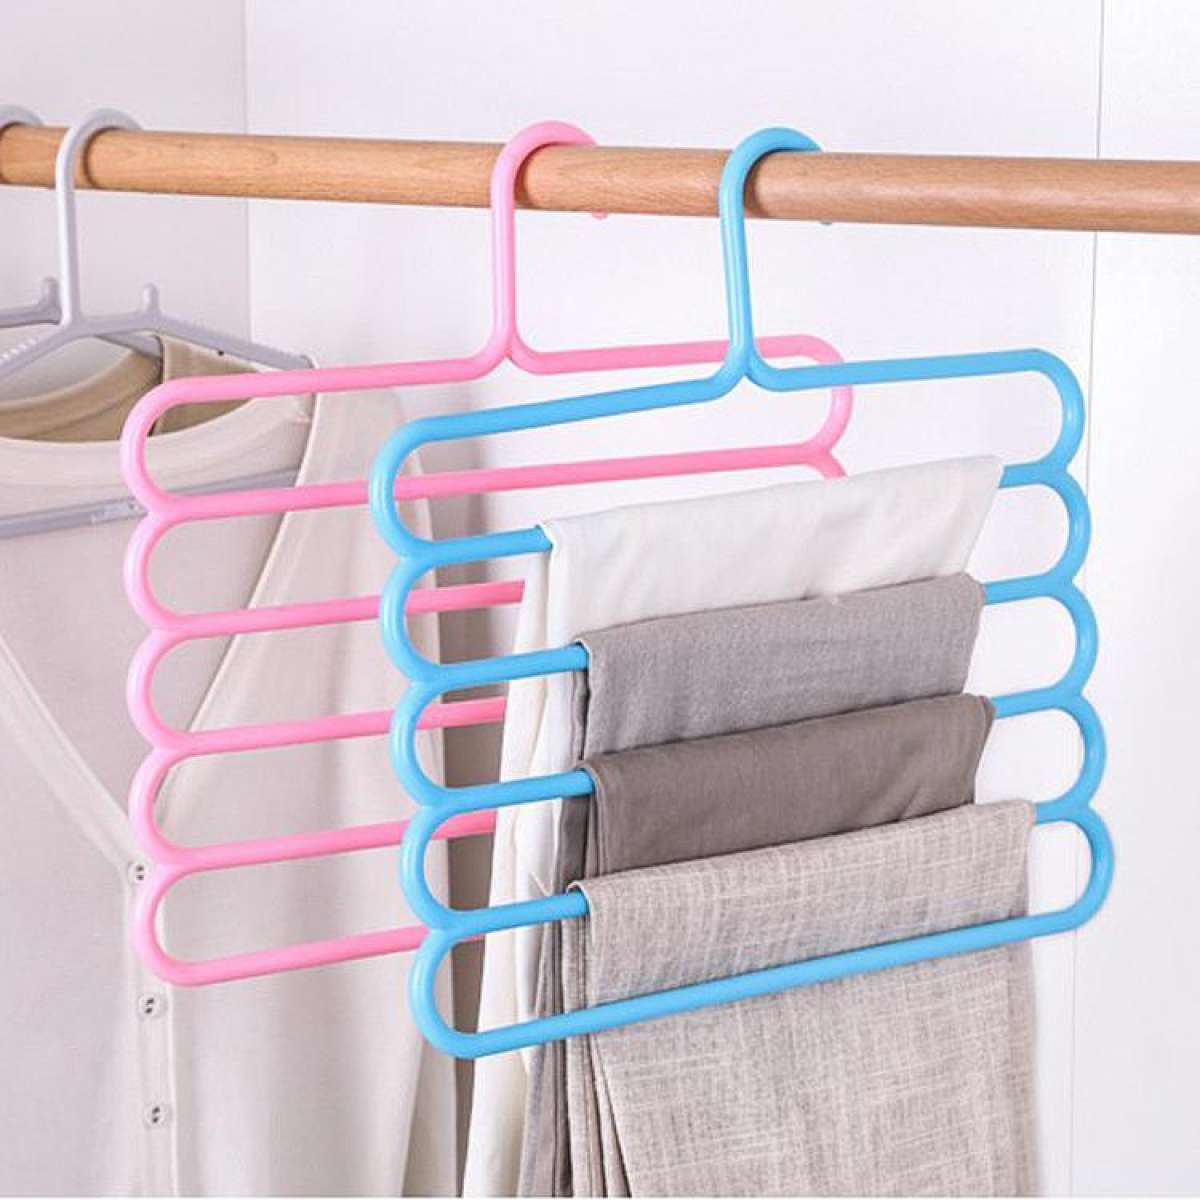 x5 Wooden Trouser Hangers Multi Hanger 4 Trousers Space Saving Clothes Wood   eBay